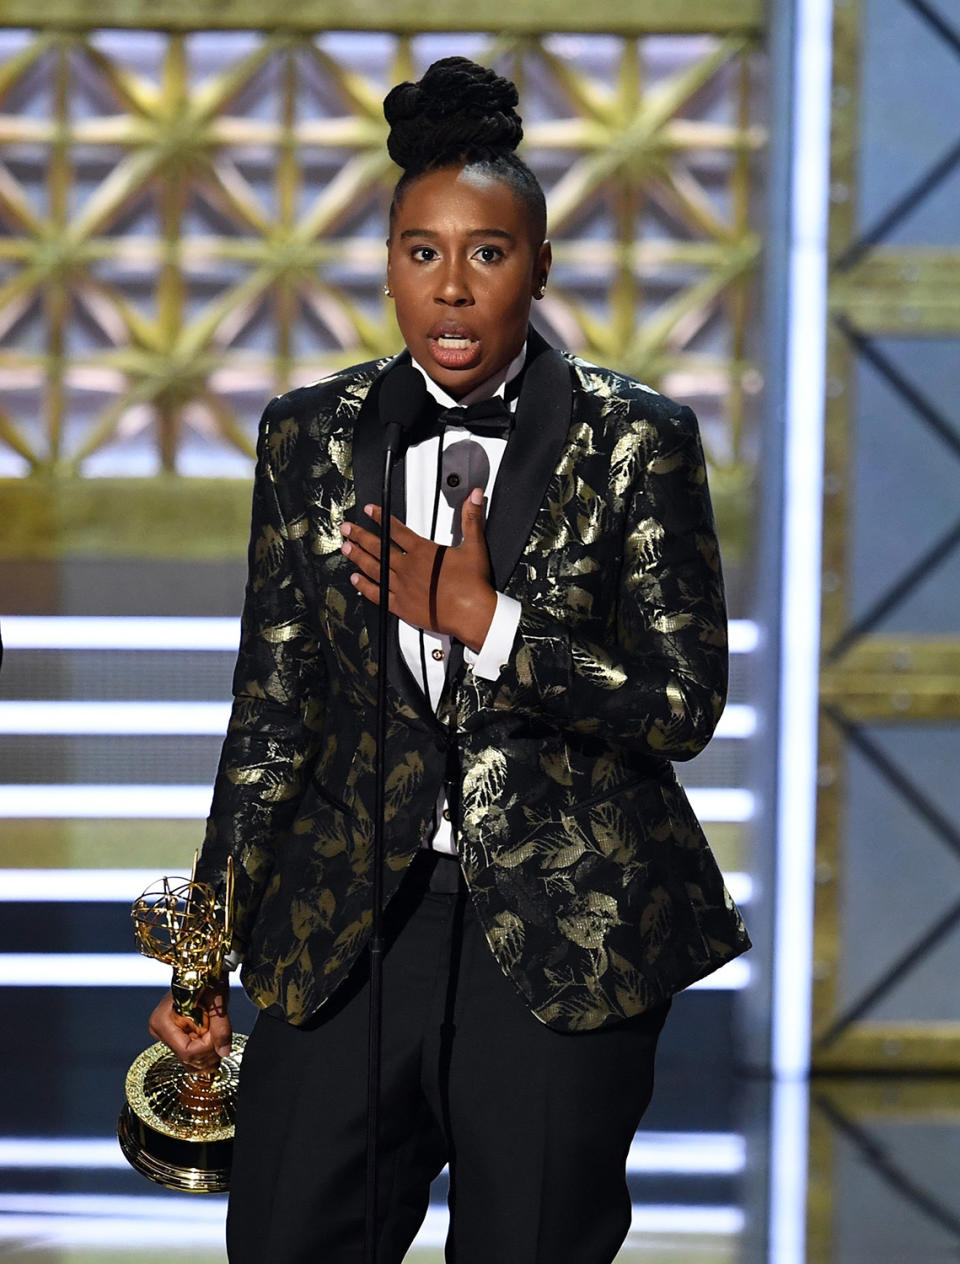 Lena Waithe accepts the Outstanding Writing for a Comedy Series award for “Master of None” during the 69th Annual Primetime Emmy Awards at Microsoft Theater on Sept. 17, 2017, in Los Angeles. (Photo: Kevin Winter/Getty Images)